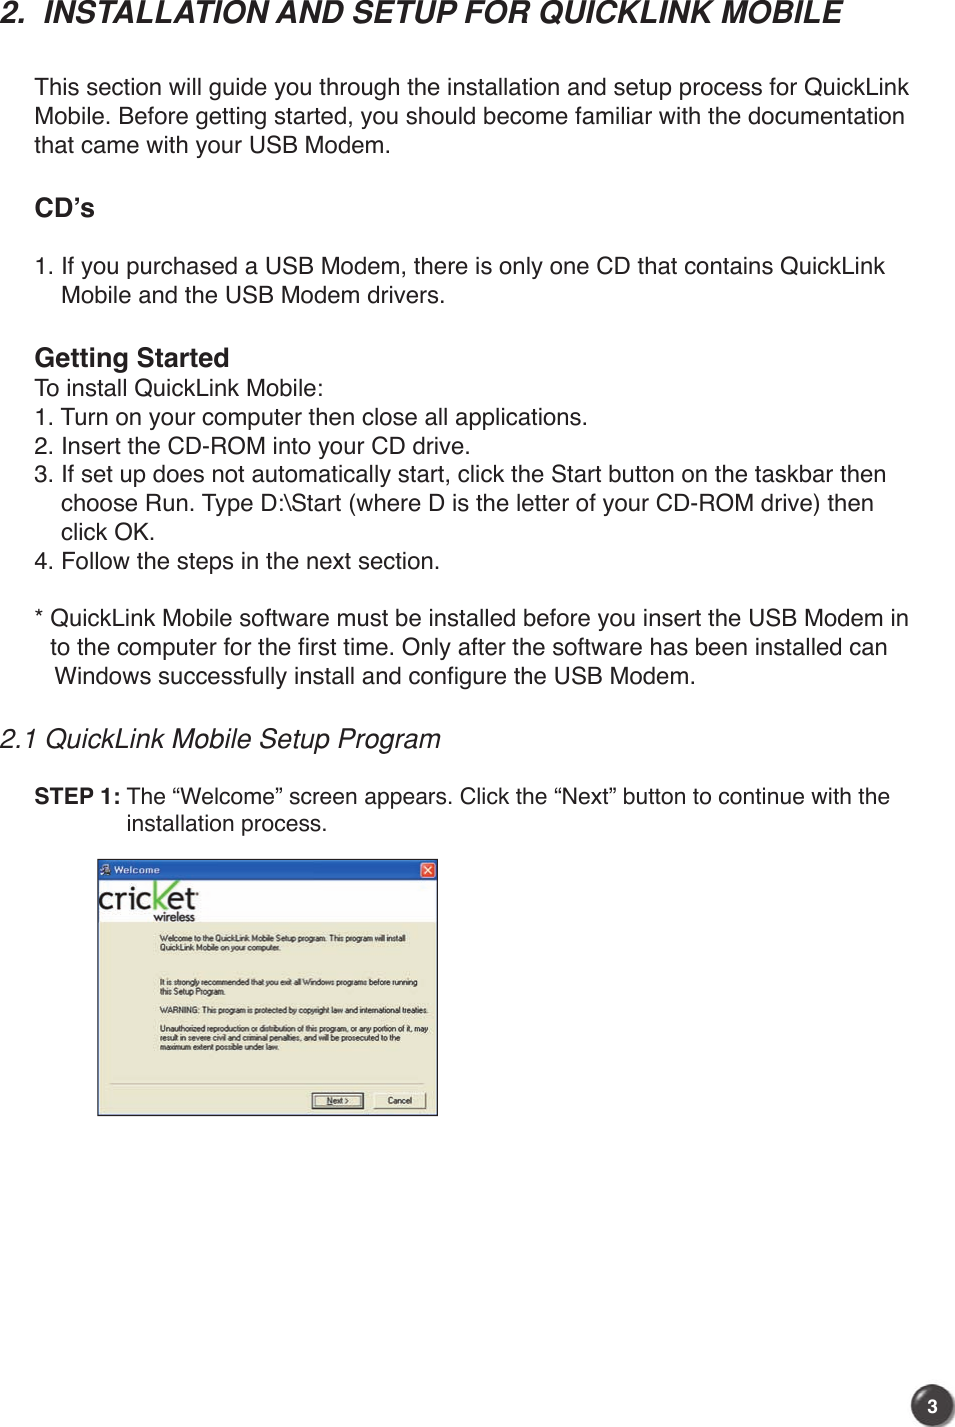 32.  INSTALLATION AND SETUP FOR QUICKLINK MOBILE  This section will guide you through the installation and setup process for QuickLink Mobile. Before getting started, you should become familiar with the documentation that came with your USB Modem. CD’s 1. If you purchased a USB Modem, there is only one CD that contains QuickLink     Mobile and the USB Modem drivers.  Getting StartedTo install QuickLink Mobile:1. Turn on your computer then close all applications.2. Insert the CD-ROM into your CD drive.3. If set up does not automatically start, click the Start button on the taskbar then     choose Run. Type D:\Start (where D is the letter of your CD-ROM drive) then     click OK.4. Follow the steps in the next section.*  QuickLink Mobile software must be installed before you insert the USB Modem in to the computer for the first time. Only after the software has been installed can    Windows successfully install and configure the USB Modem.2.1 QuickLink Mobile Setup ProgramSTEP 1:  The “Welcome” screen appears. Click the “Next” button to continue with the installation process.